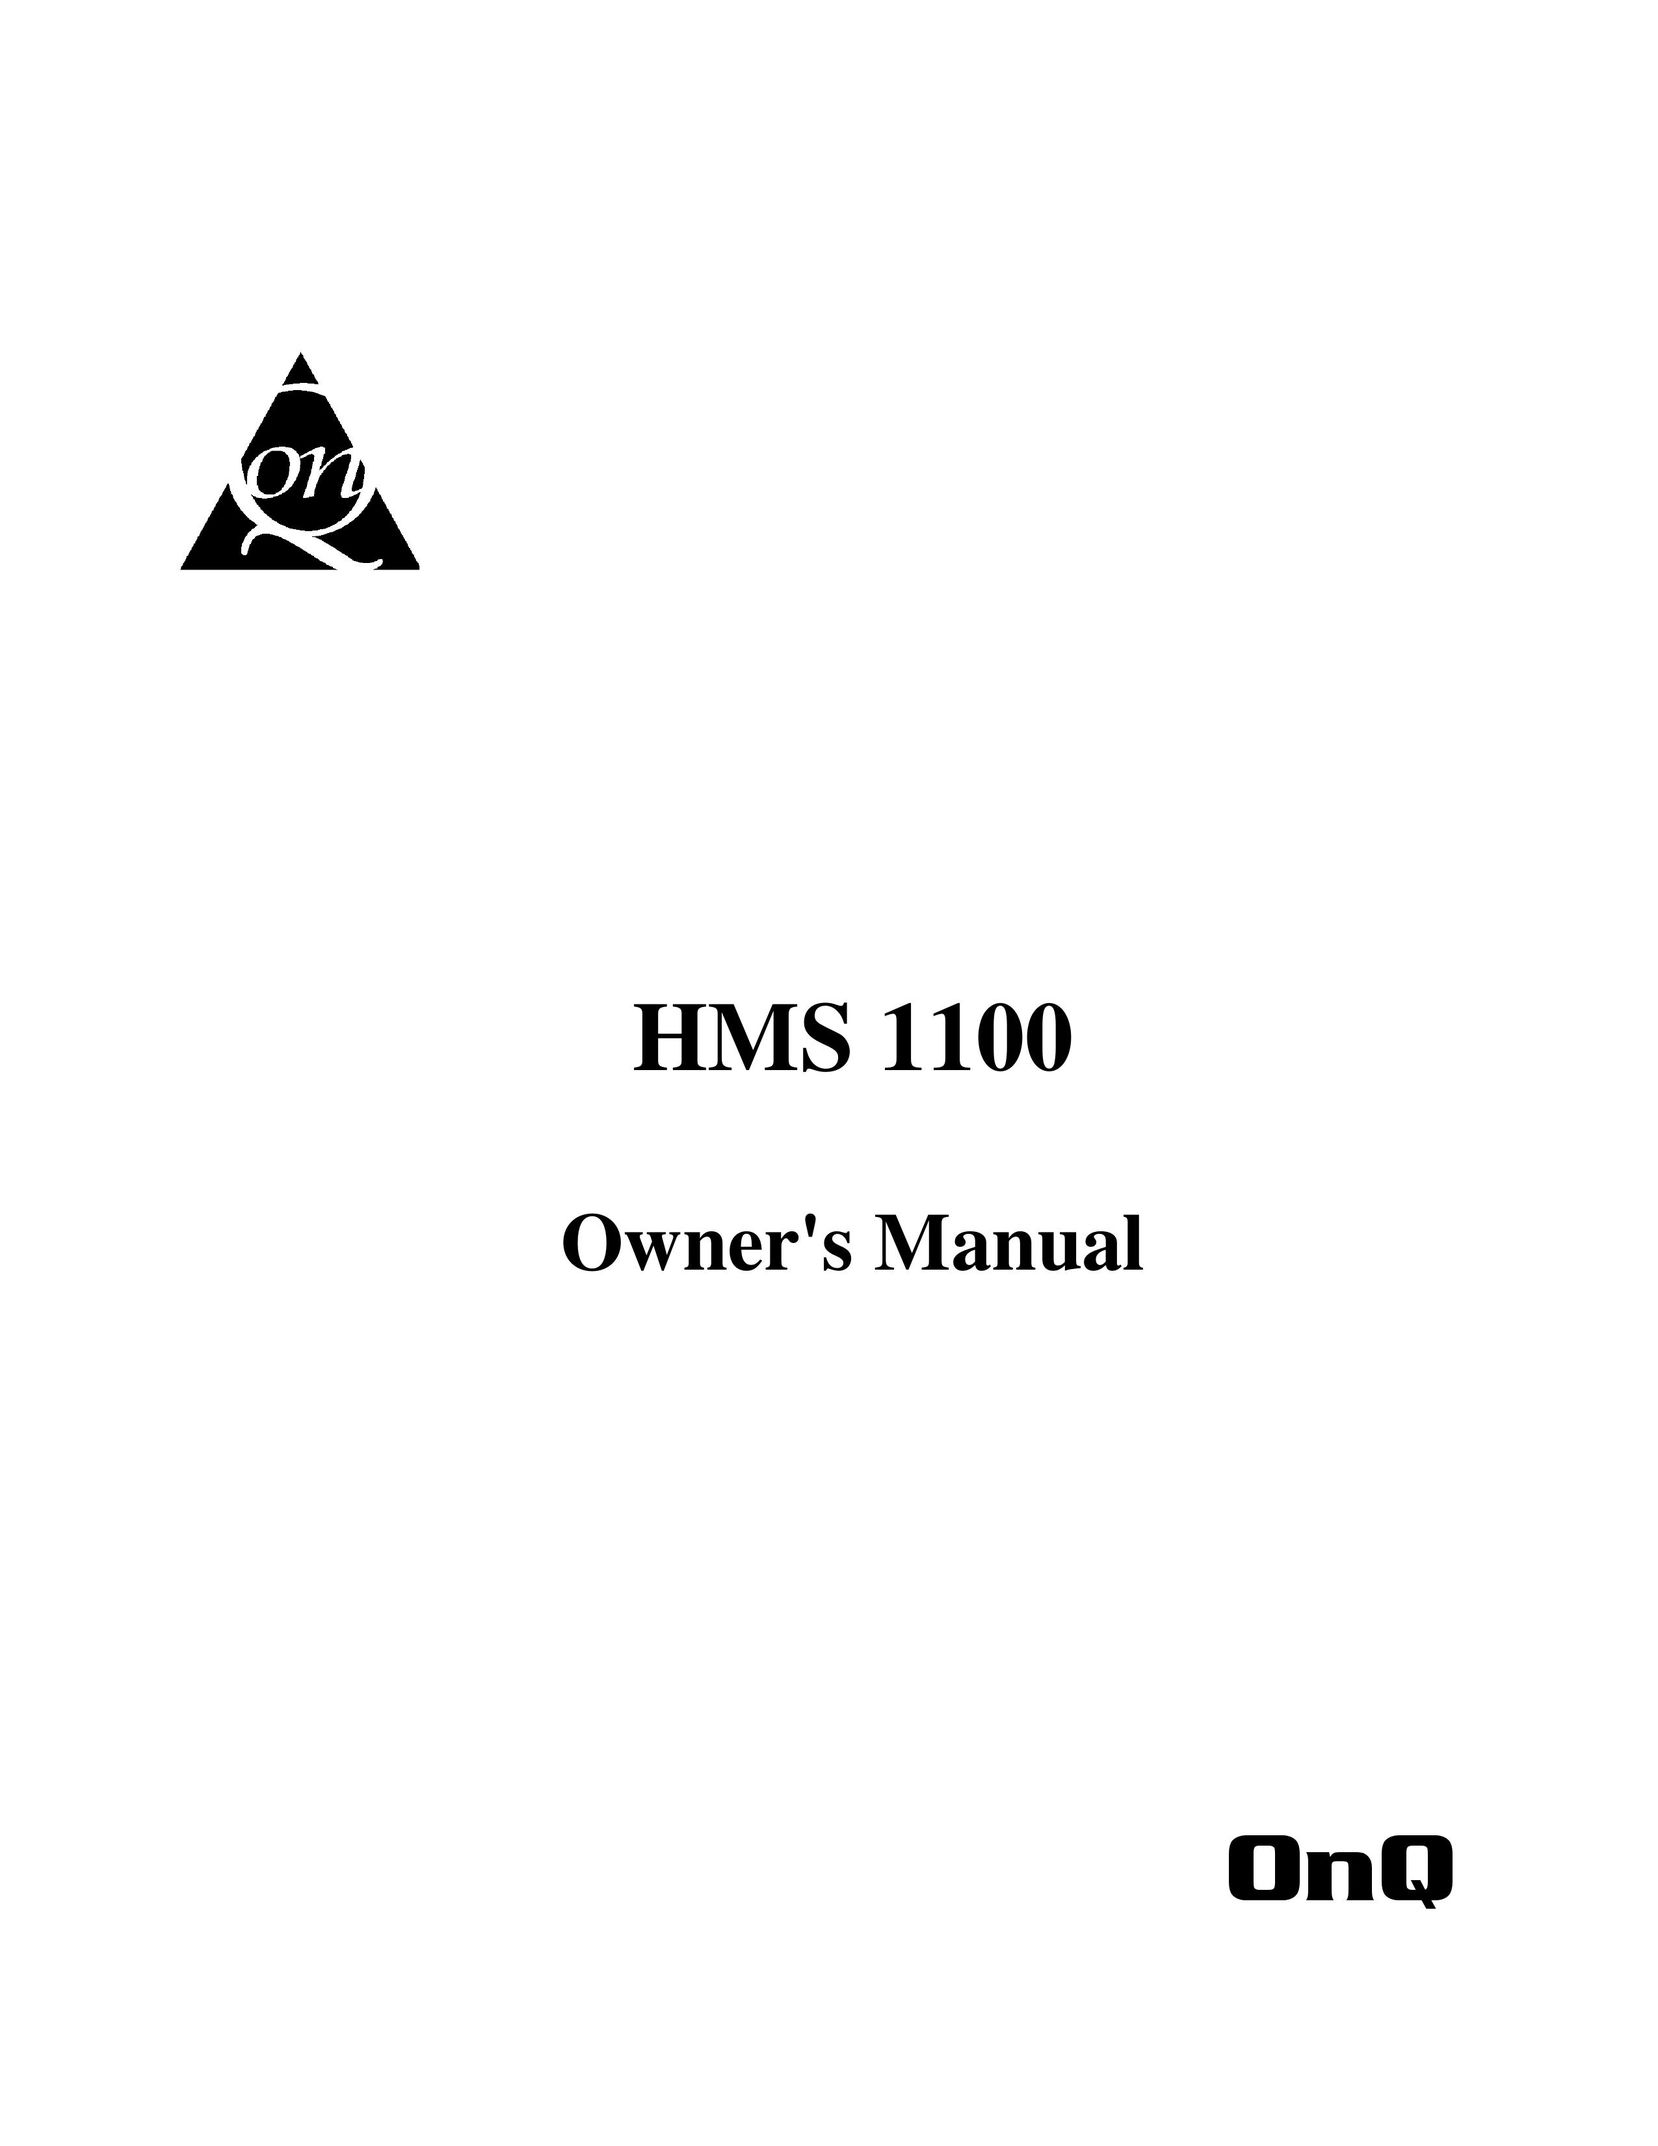 On-Q/Legrand HMS 1100 Home Security System User Manual